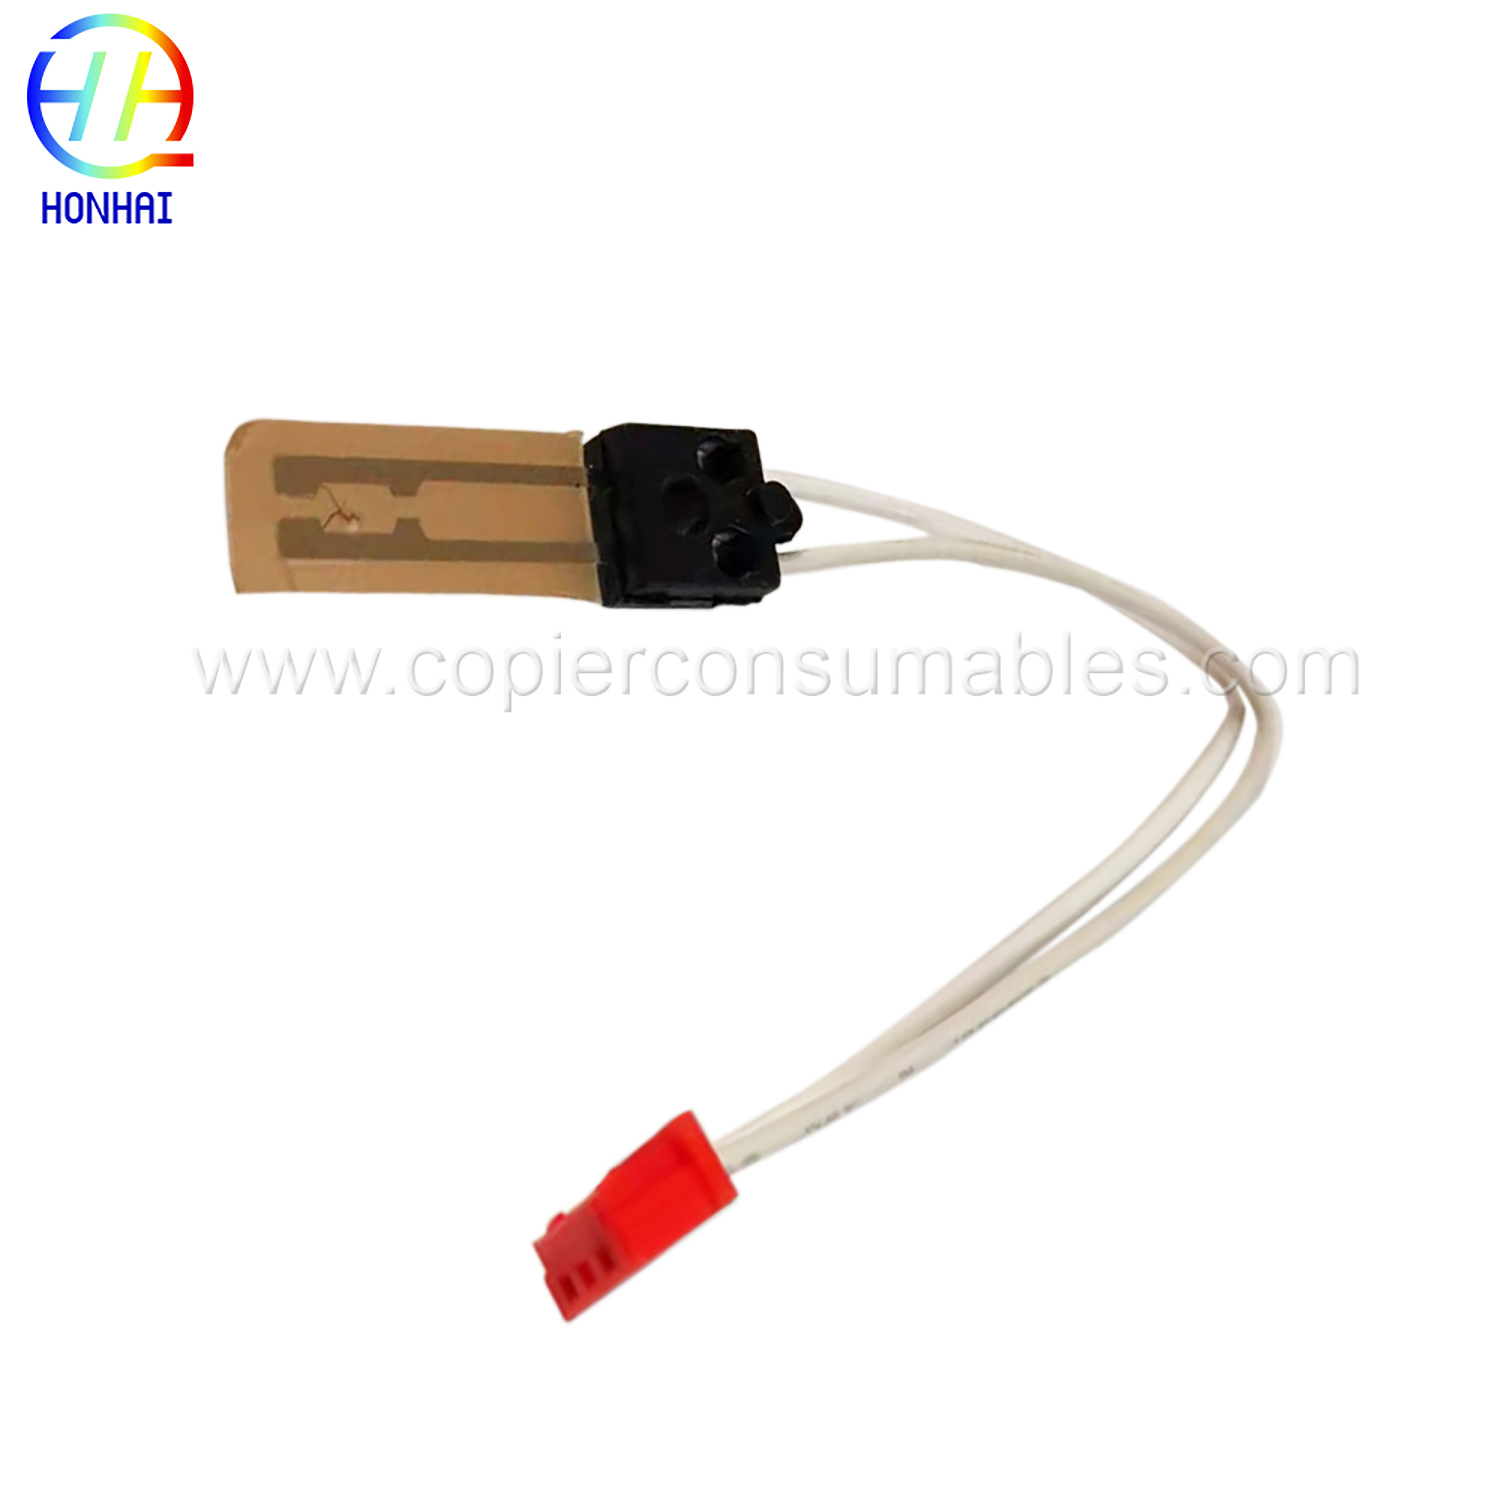 Fuser Thermistor for Ricoh 1022 1027 2022 2027 2032 3025  3030 MP2510 MP2550 MP2851 MP3010 MP3351 AW100053